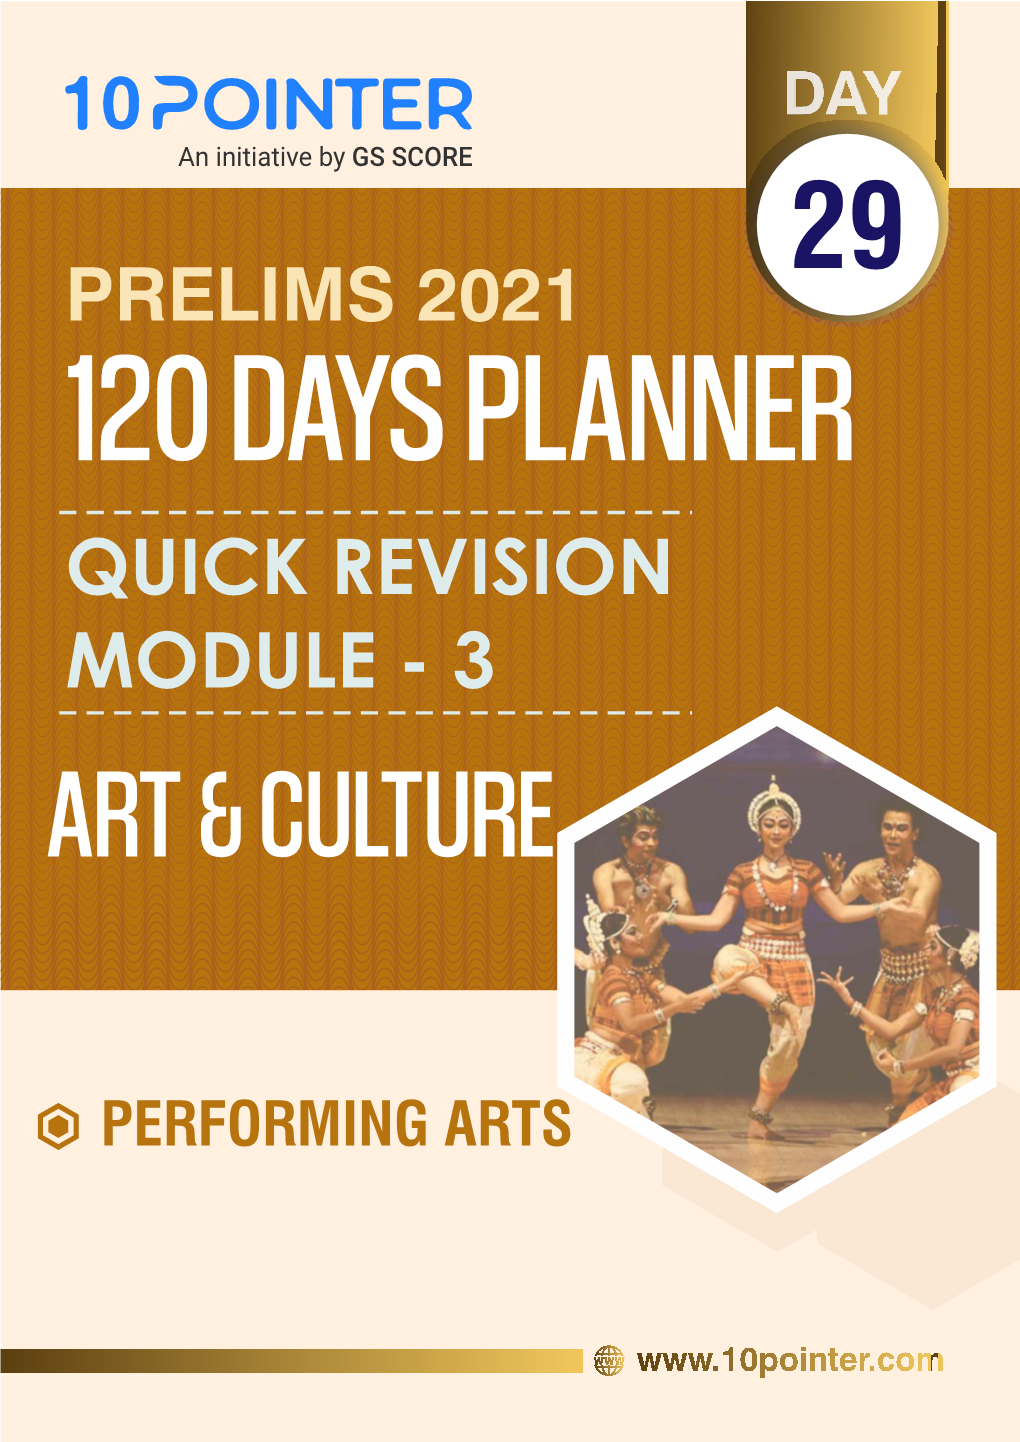 DAY 29 PERFORMING ARTS.Indd.Indd